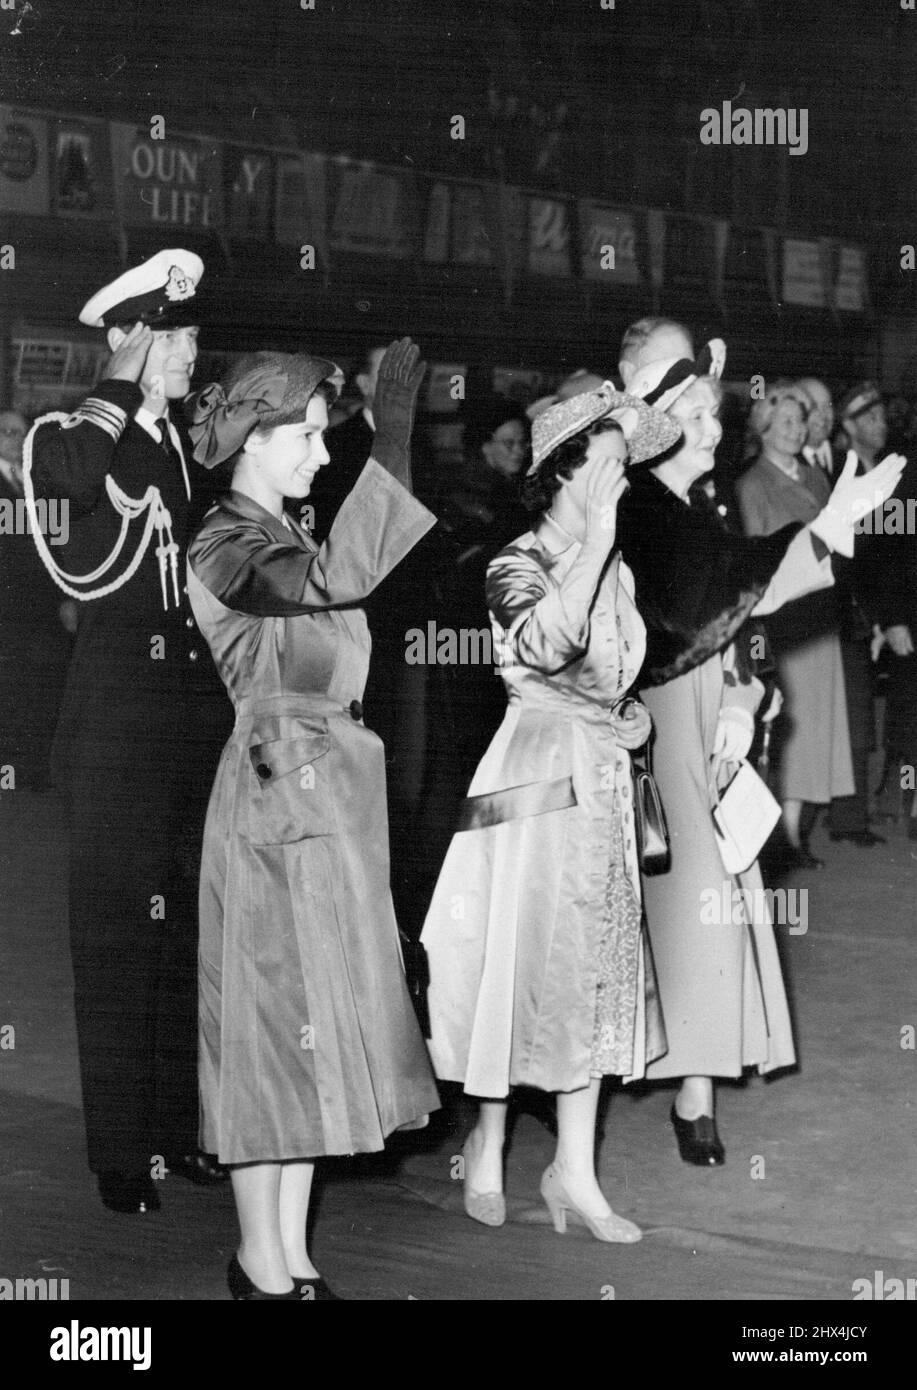 Princesses, Duke of Edinburgh, Say 'Goodbye'. To King And Queen of Denmark. A salute from the Duke of Edinburgh, and waves from Princess Elizabeth, Princess Margaret, and Princess Patricia (right), as they say 'Goodbye' to king Frederik and Queen Ingrid of Denmark as they leave London's Liverpool-street station for their Journey home at the end of their four-day state visit to Britain. May 11, 1951. Stock Photo